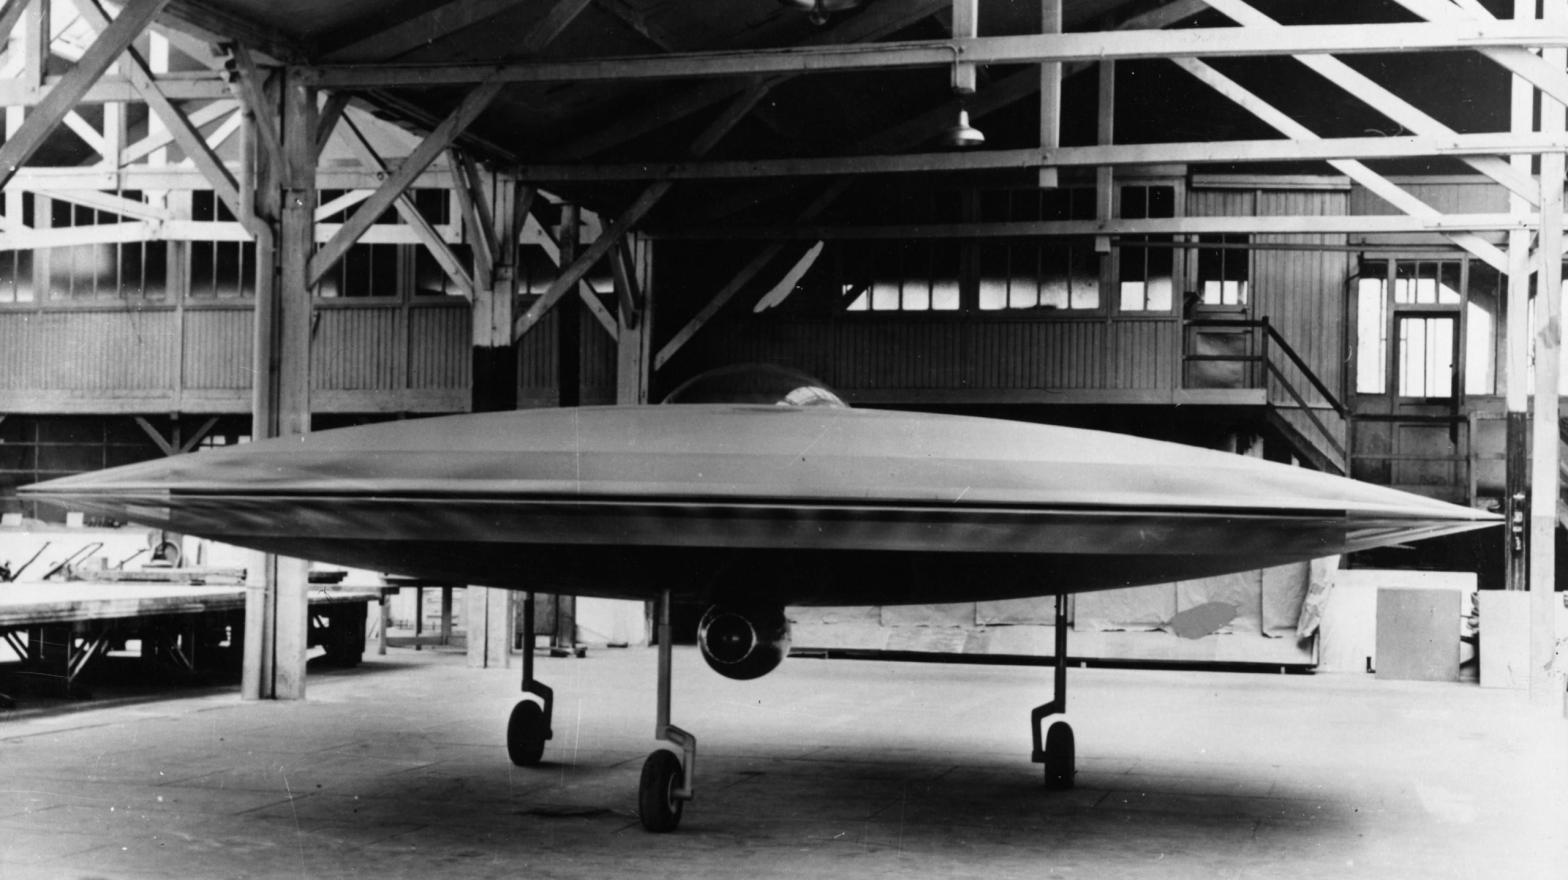 A 3/5 scale model of a proposed VTOL 'flying saucer' aircraft, the Couzinet Aerodyne RC-360, on display at a workshop on the Ile de la Jatte in Levallois-Perret, Paris, 1955 (Photo: Keystone, Getty Images)